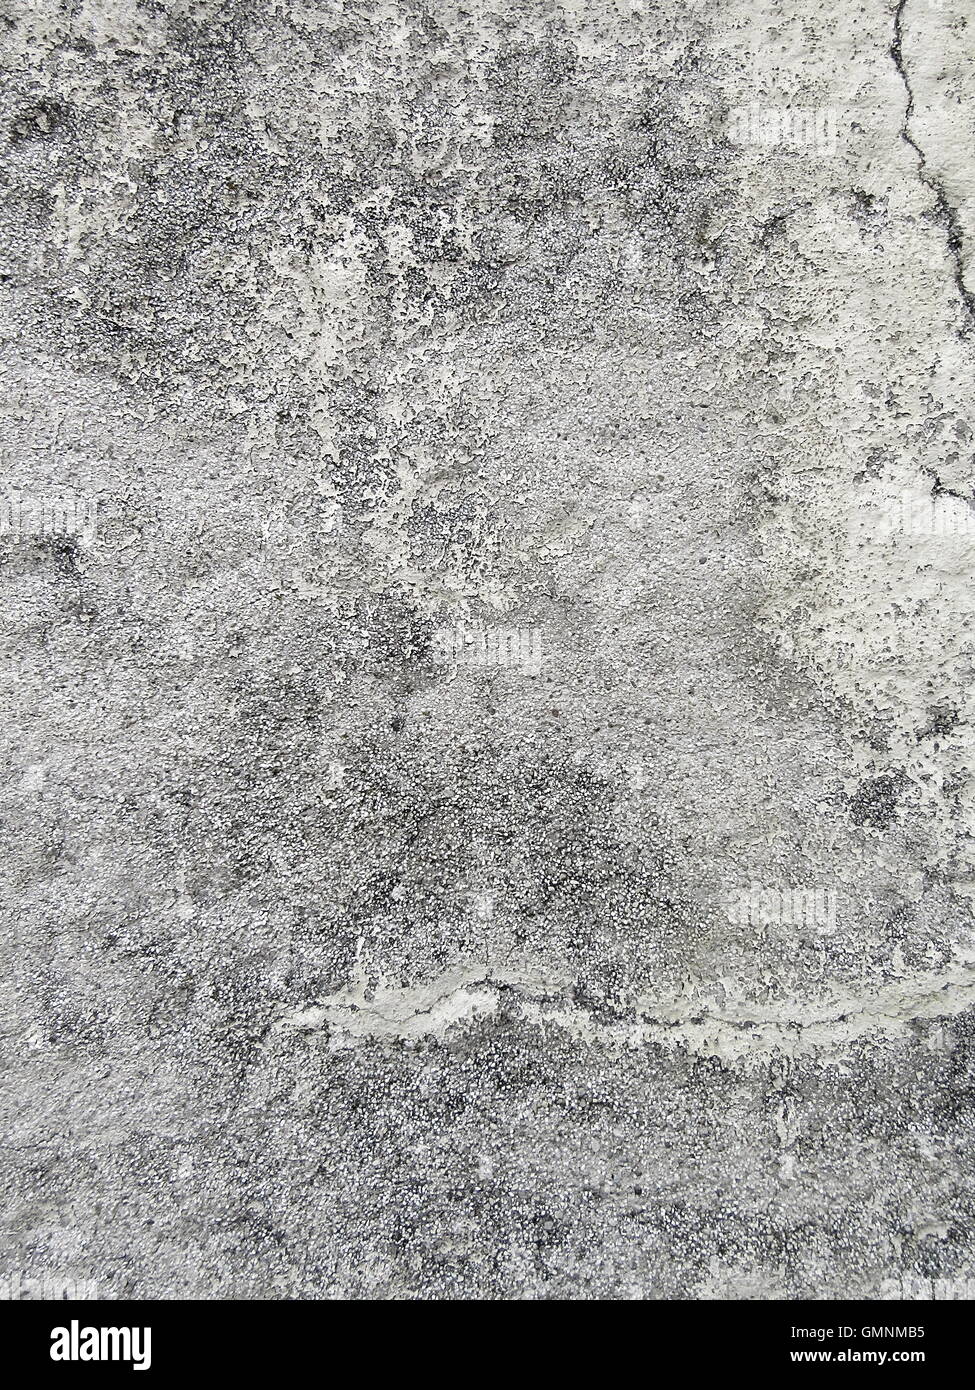 Full frame shot of old weathered gray concrete wall background Stock Photo